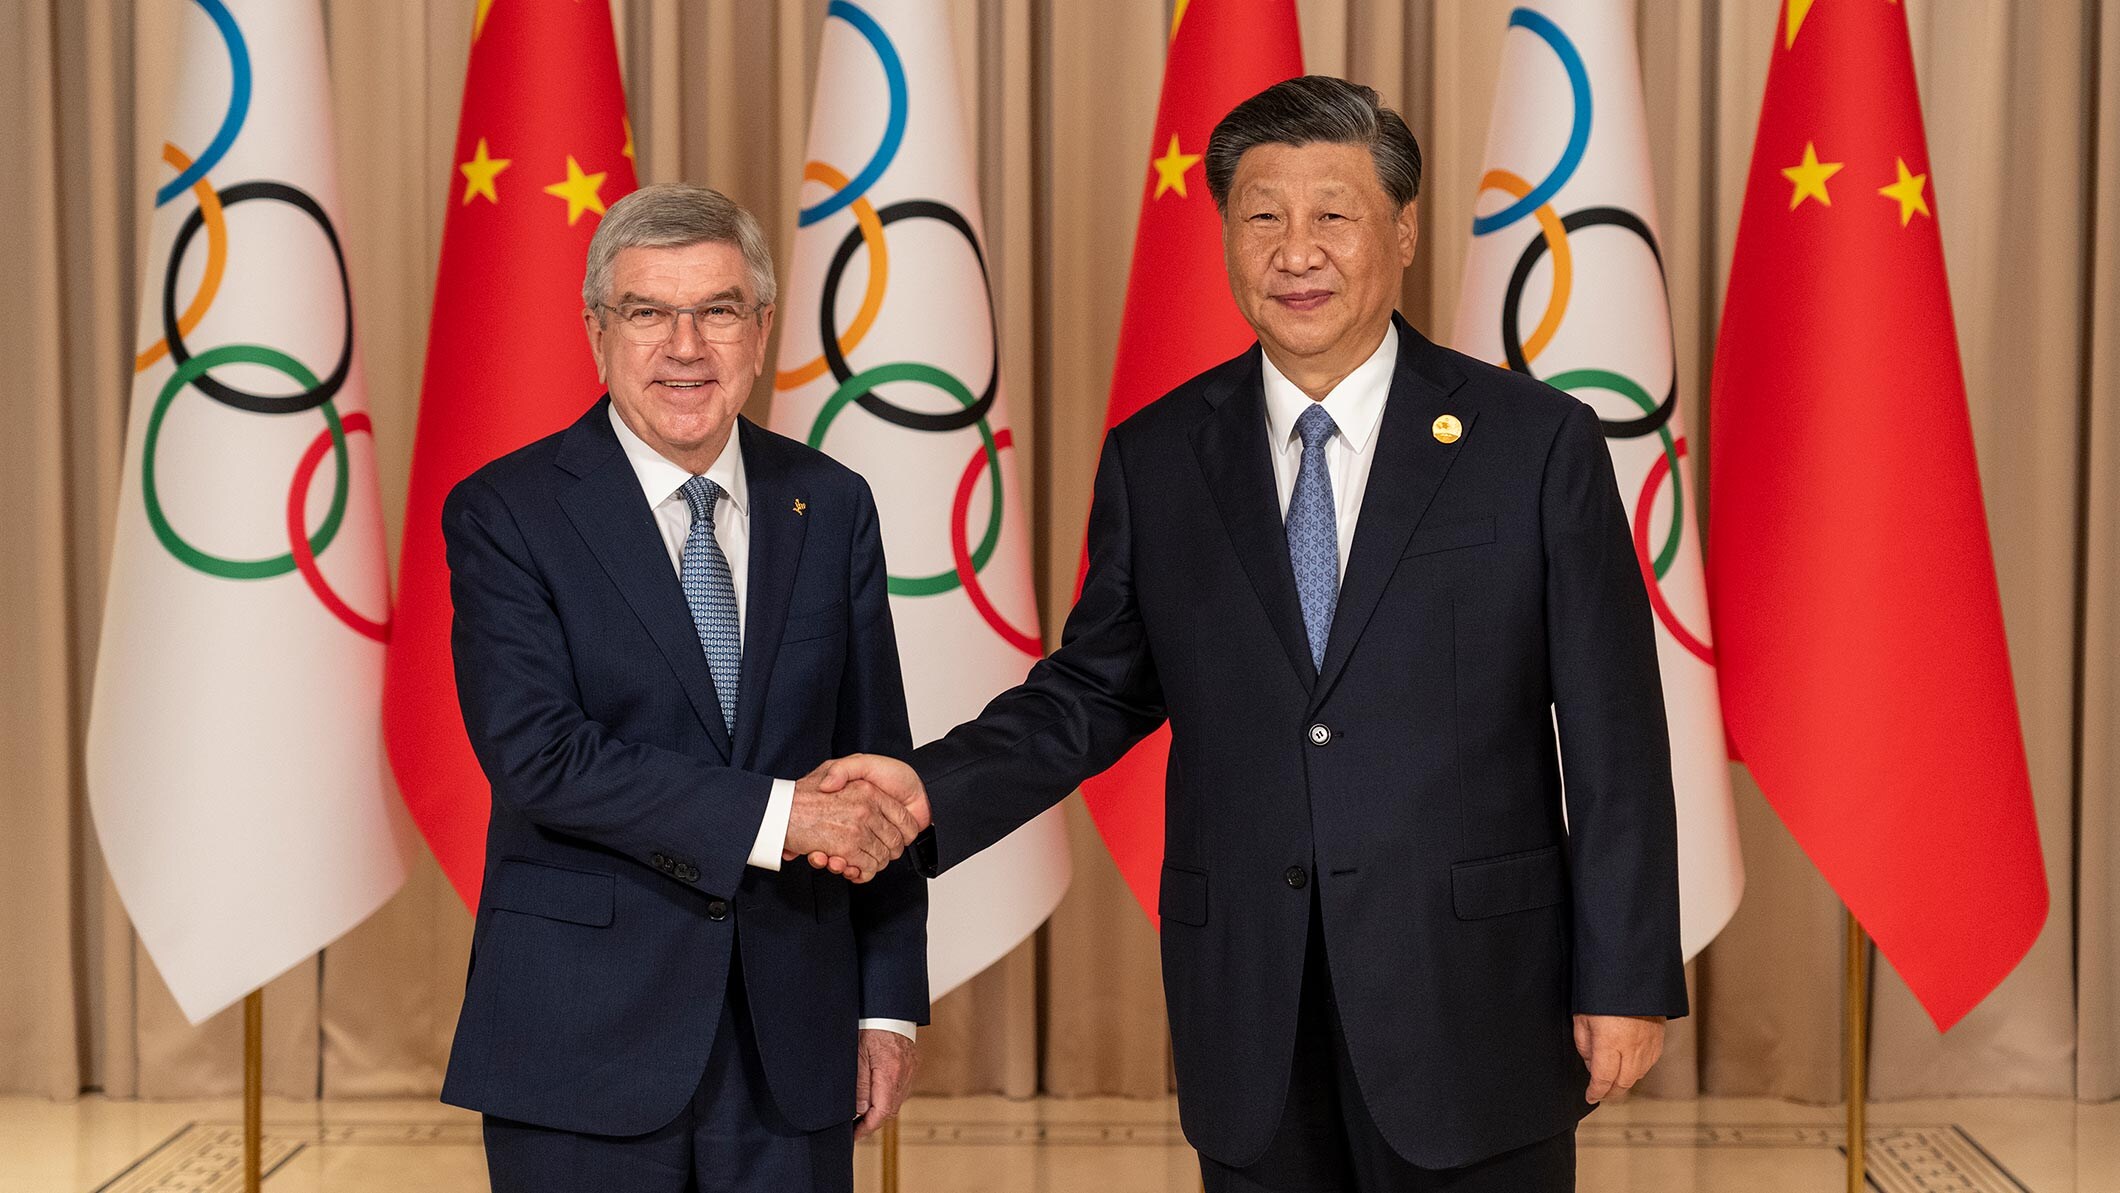 IOC President Bach welcomed by Chinese President Xi Jinping